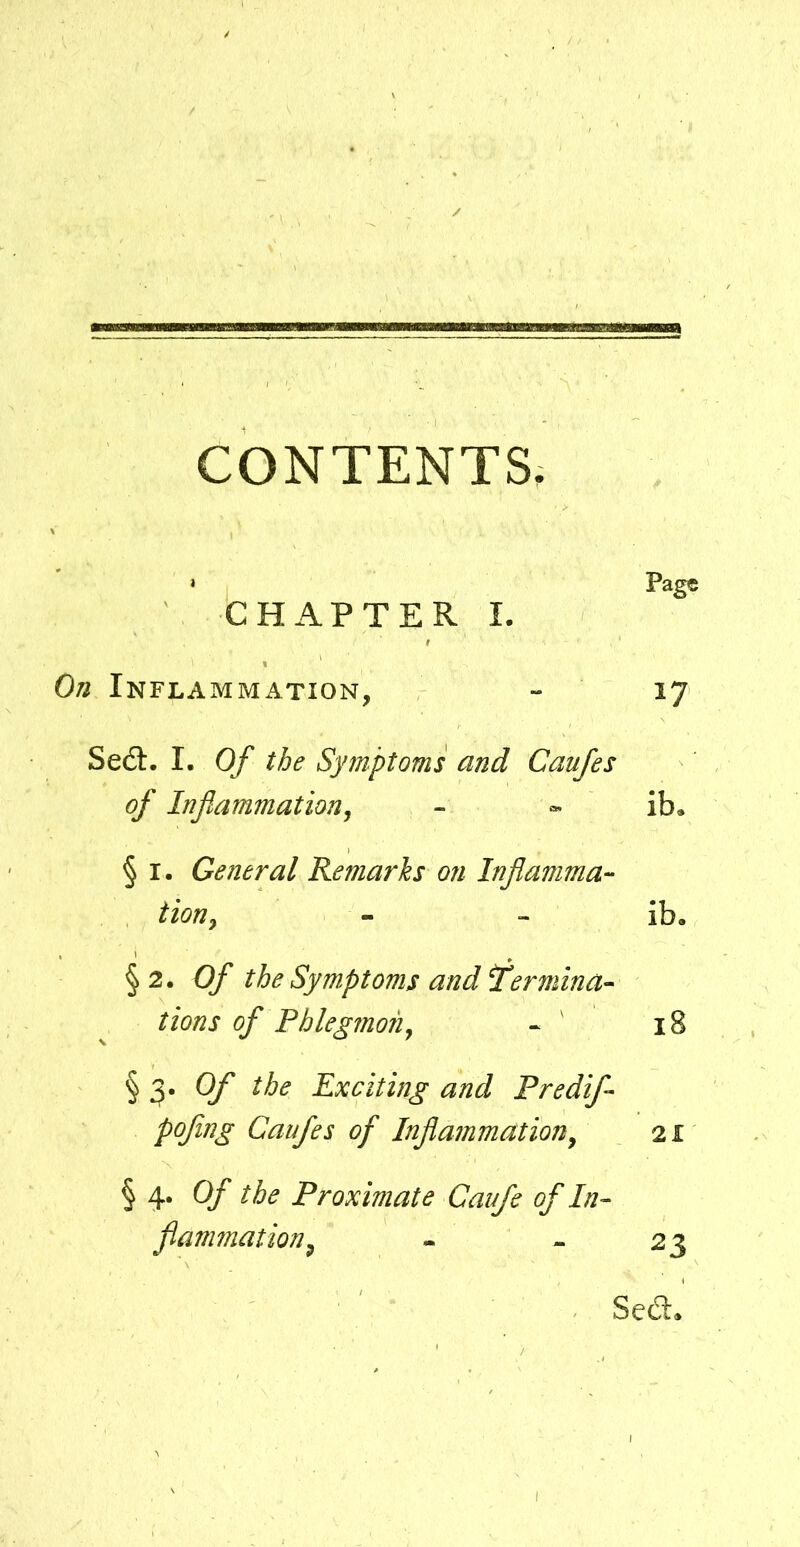 CONTENTS, Pag© CHAPTER I. On Inflammation, - 17 Sedt. I. Of the Symptoms and Caufes of Inflammation^ - ib. § I. General Remarks on Inflamma- tion^ - - ib. §2. Of the Symptoms and termina- tions of Fhlegmon^ « ' 18 § 3. Of the Exciting and Predif- pofing Caufes of Inflammation^ 21 § 4. Of the Proximate Caufe of In- flammation^ - - 23 Sedt.